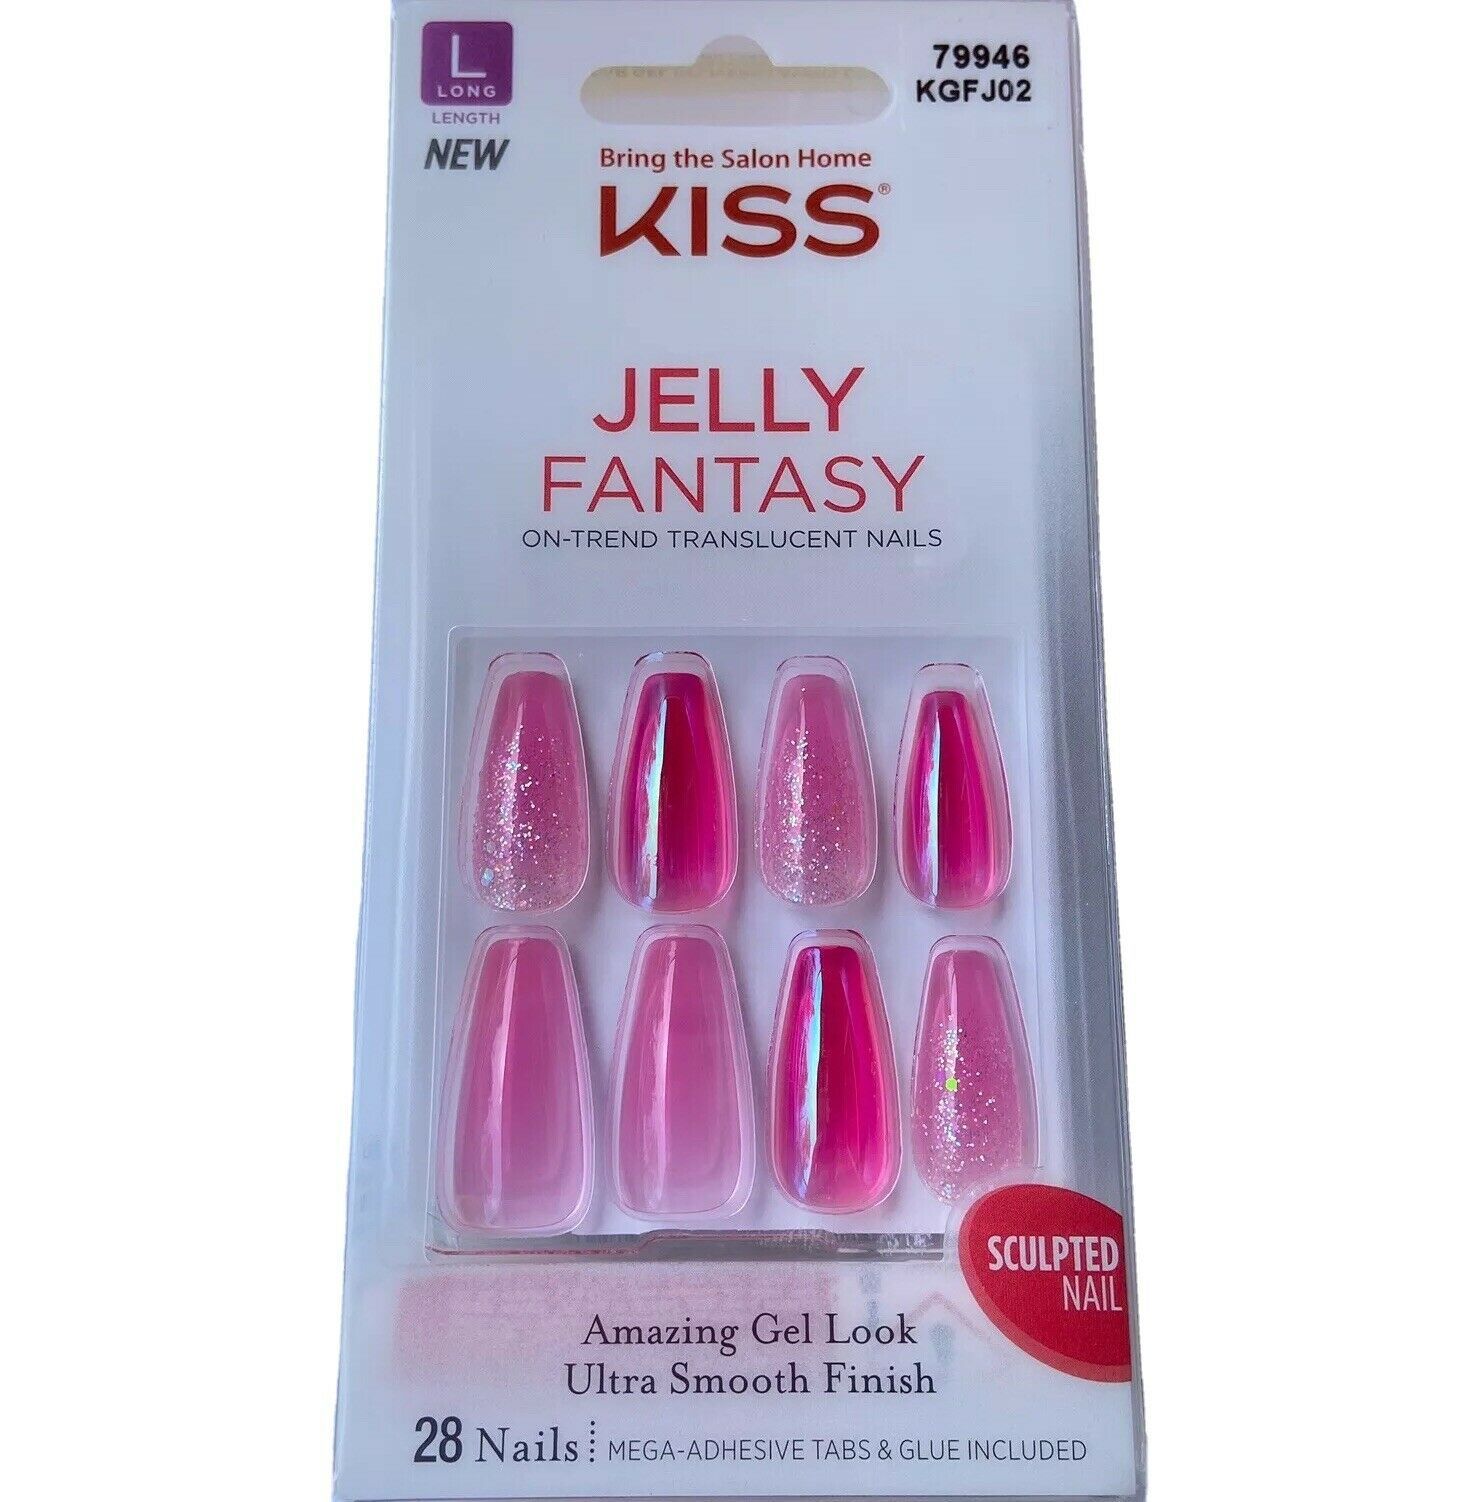 NEW Kiss Nails Jelly Fantasy Press or Glue Manicure Long Gel Coffin ...